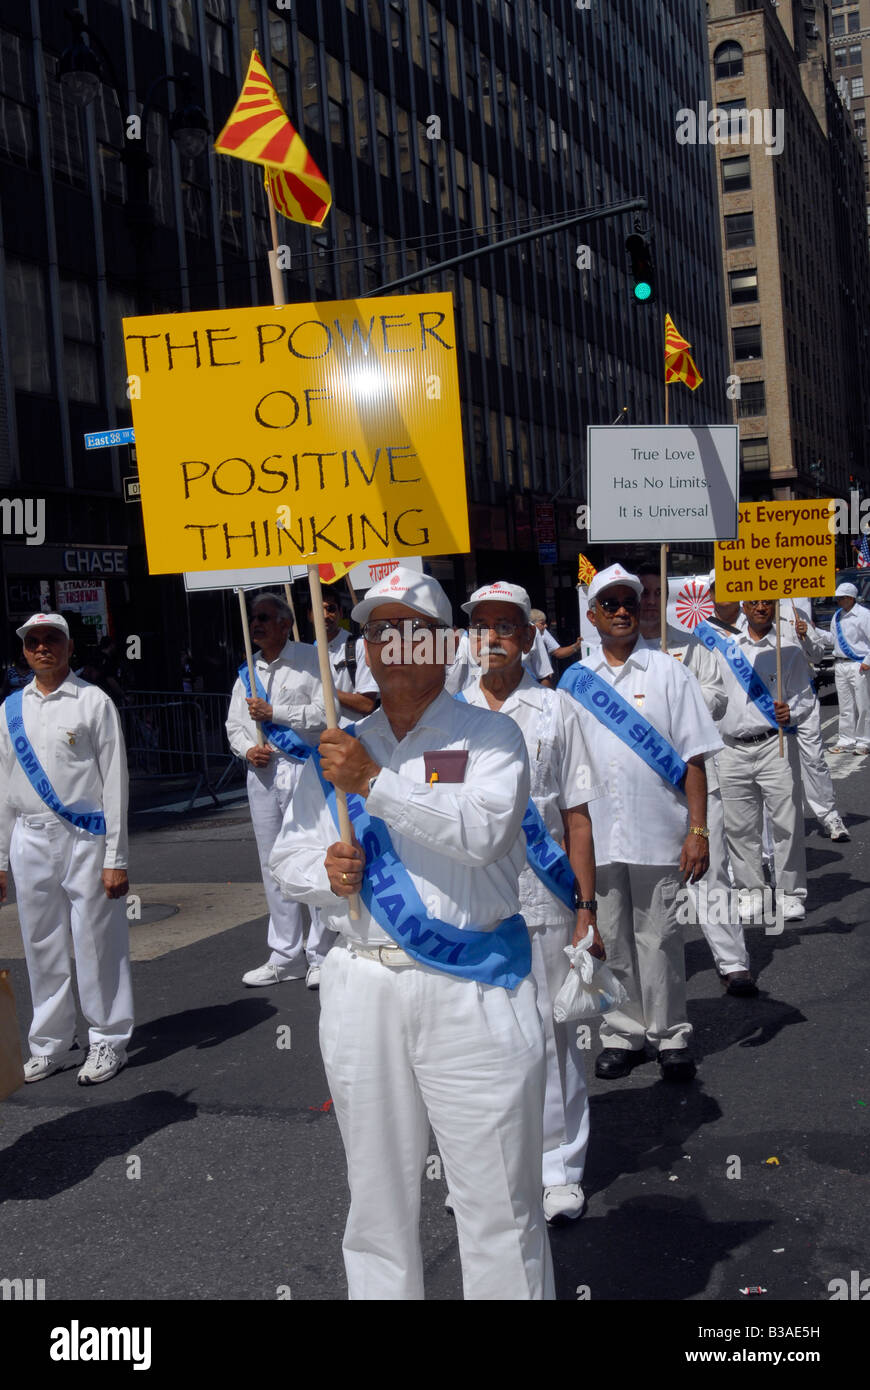 Members of the Brahma Kumaris World Spiritual Organization march in the Indian Independence Day Parade in New York Stock Photo